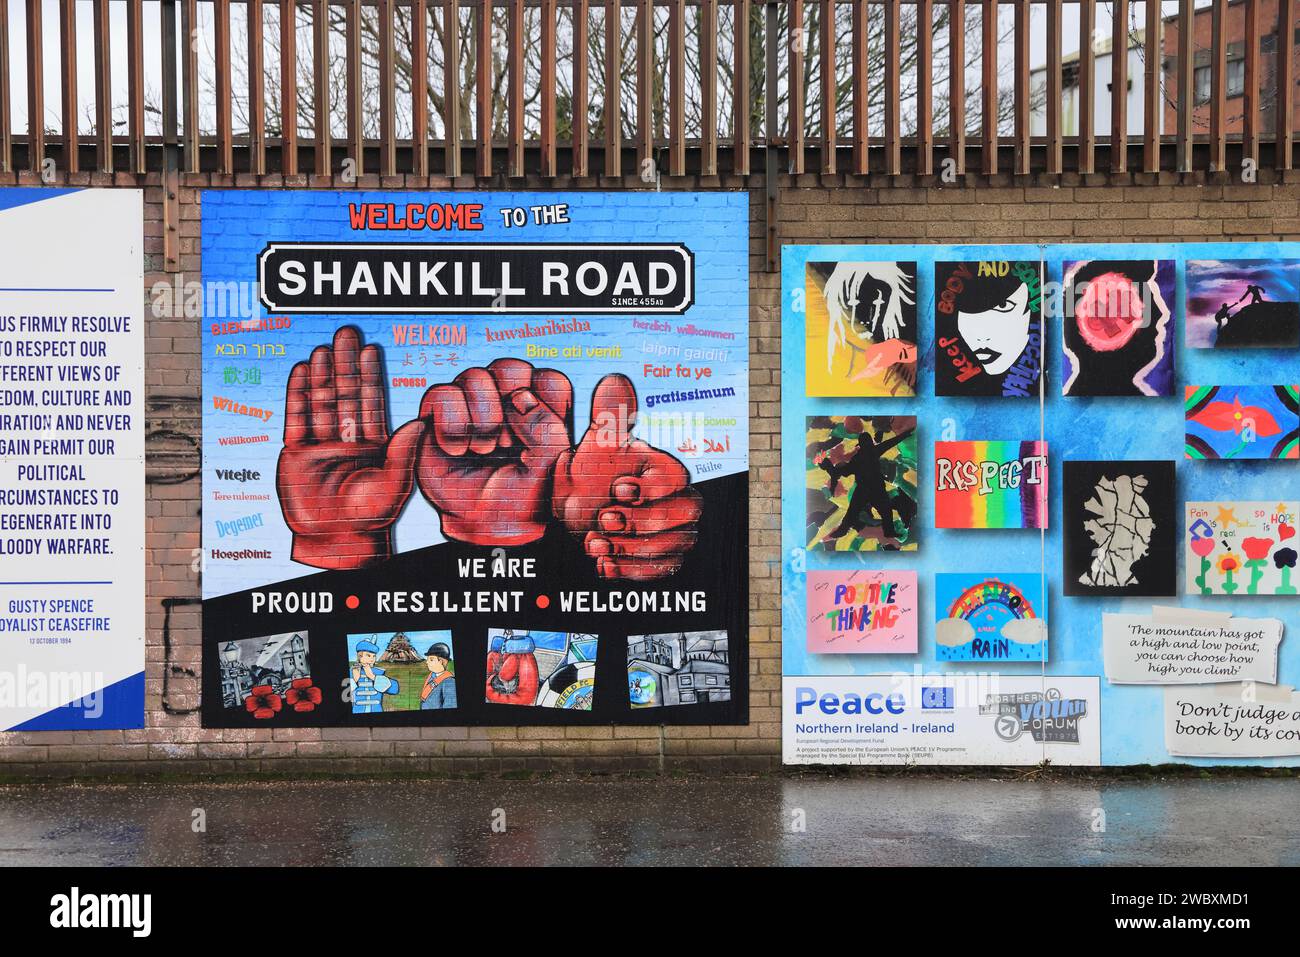 Welcome to the Shankill Road sign, in the Protestant Loyalist area of Belfast, NI, UK Stock Photo